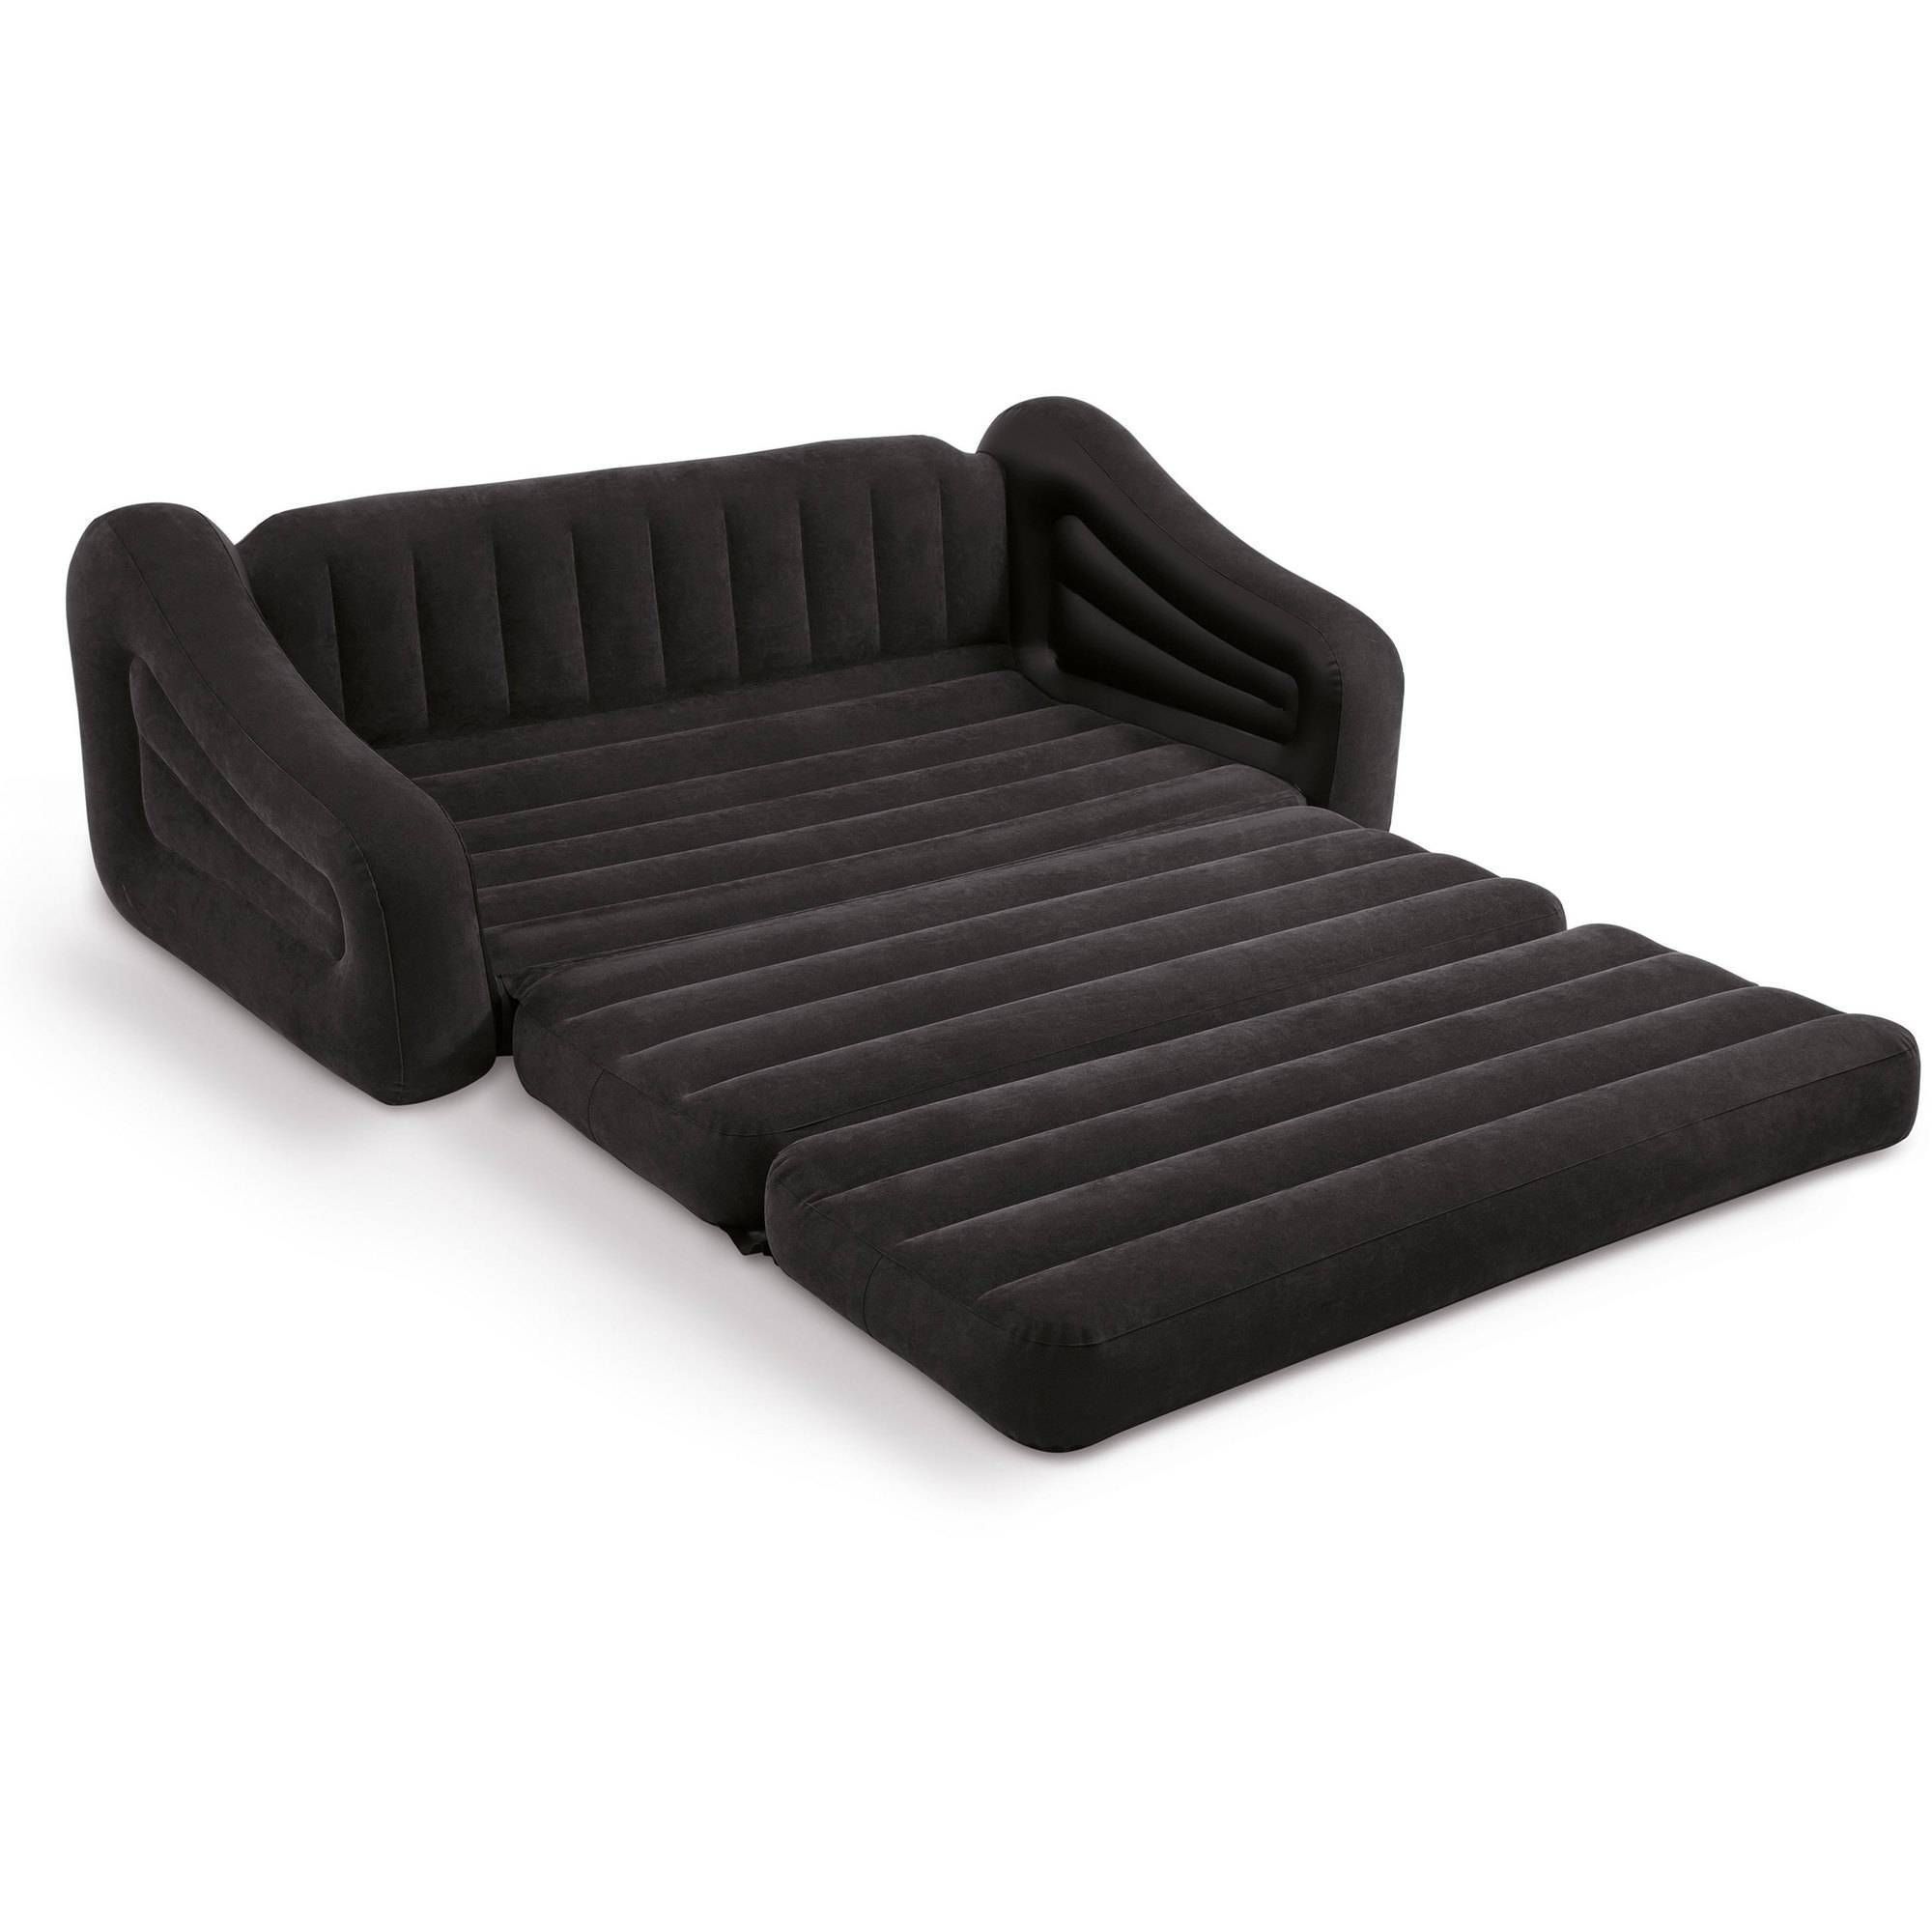 Furniture: Comfort Inflatable Furniture Walmart For Your Relaxing Throughout Cheap Sofa Beds (View 24 of 30)